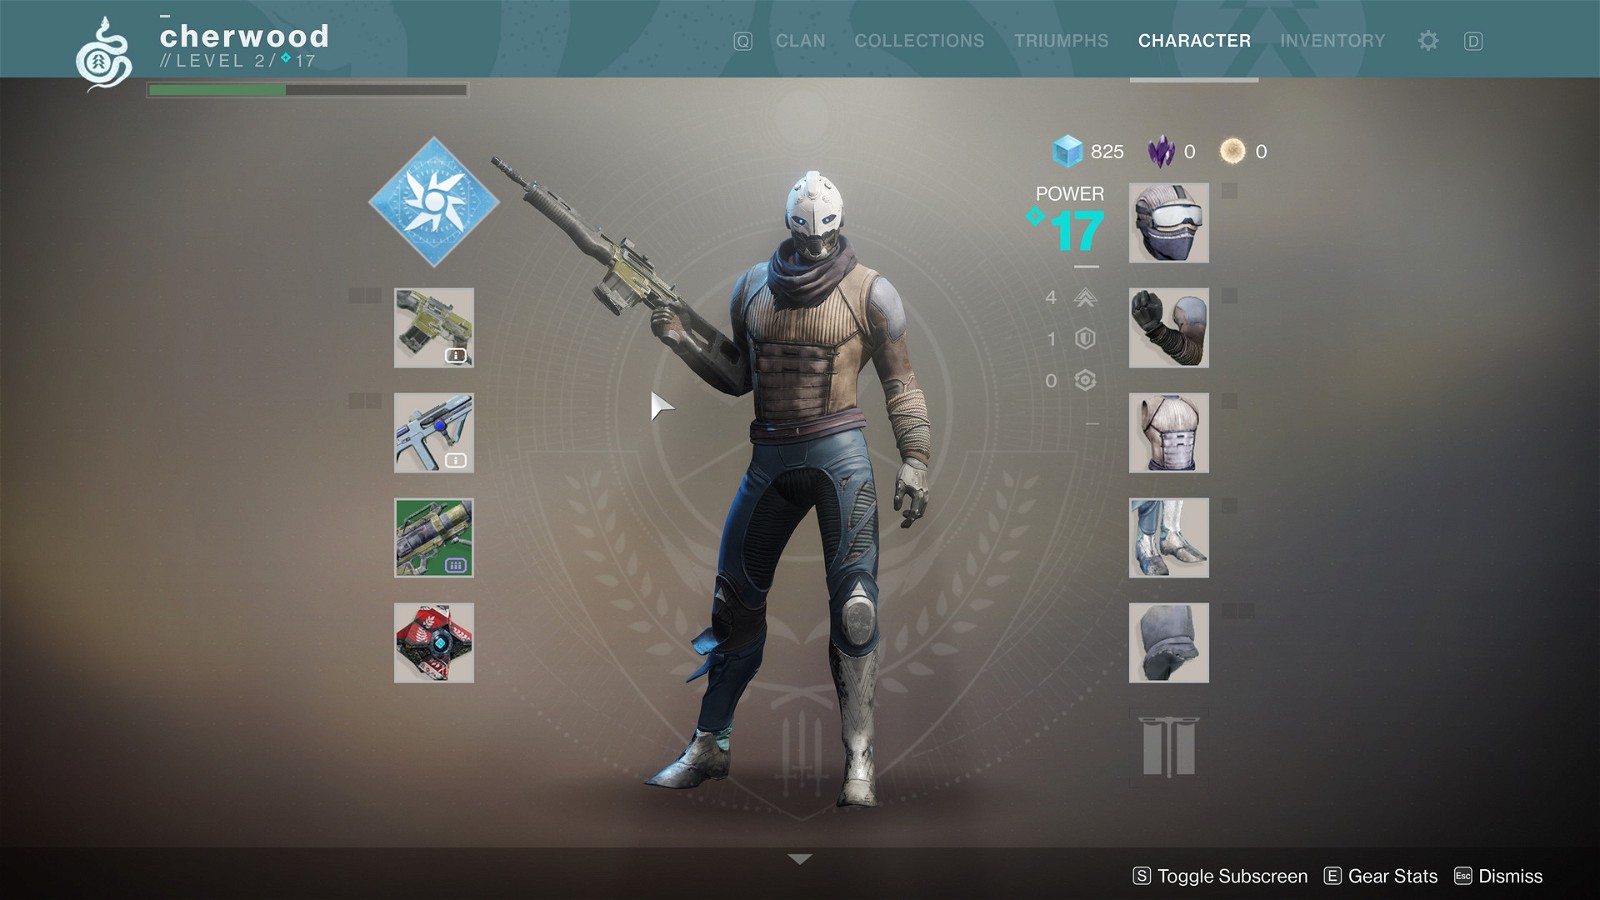 Destiny 2 Also Uses a Cursor Menu Similar to Destiny, Albeit a Much Better One (taken from InterfaceInGame.com)